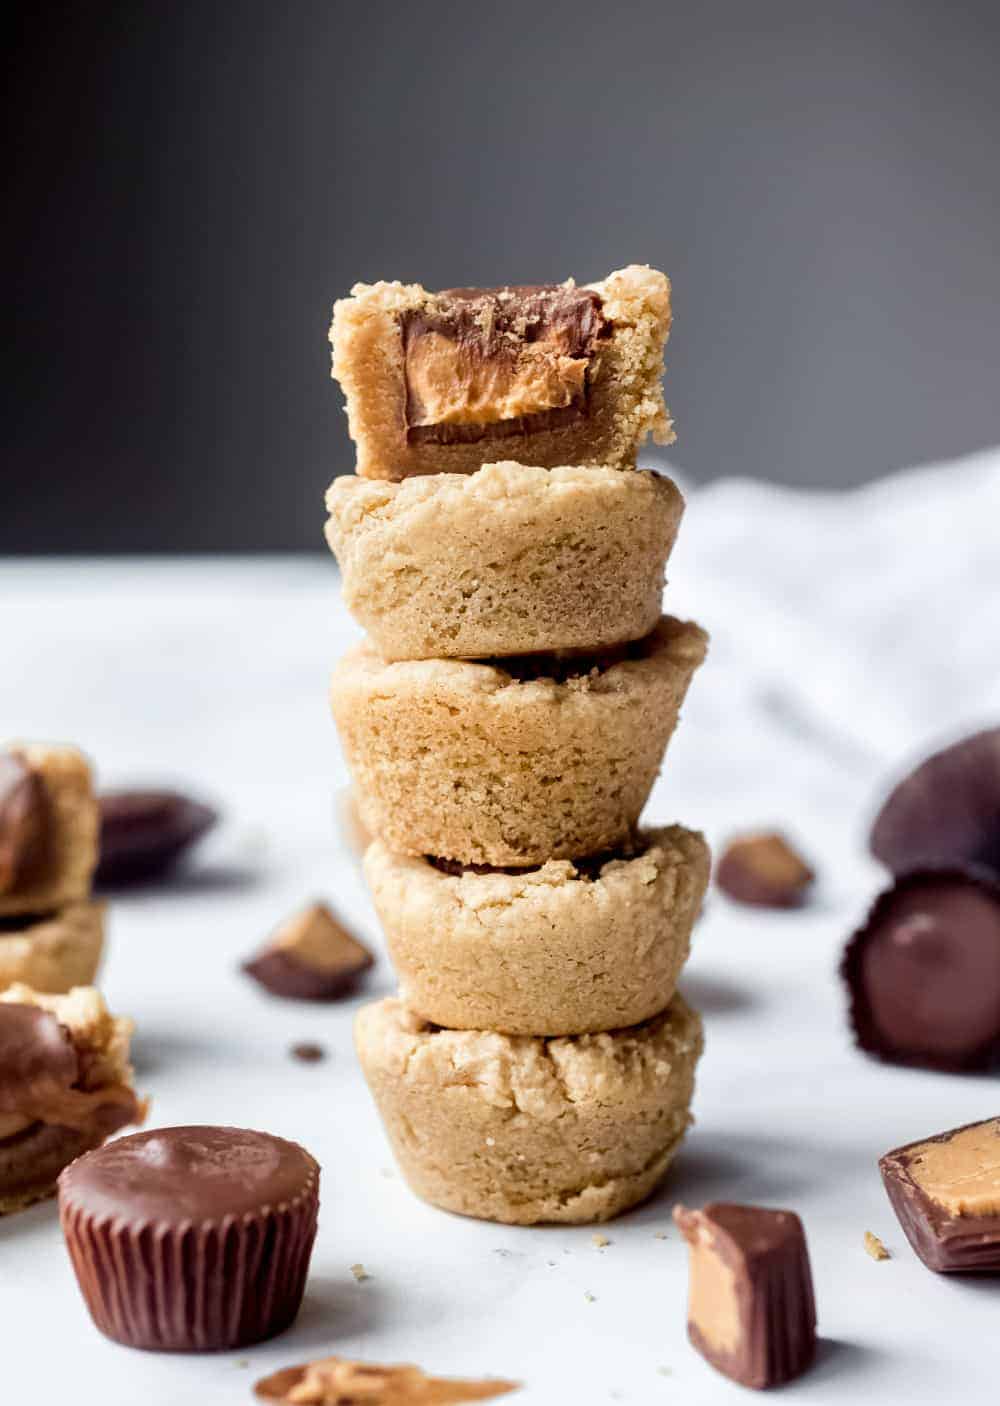 5 stacked peanut butter cup cookies with the top cookie cut in half to show the peanut butter center